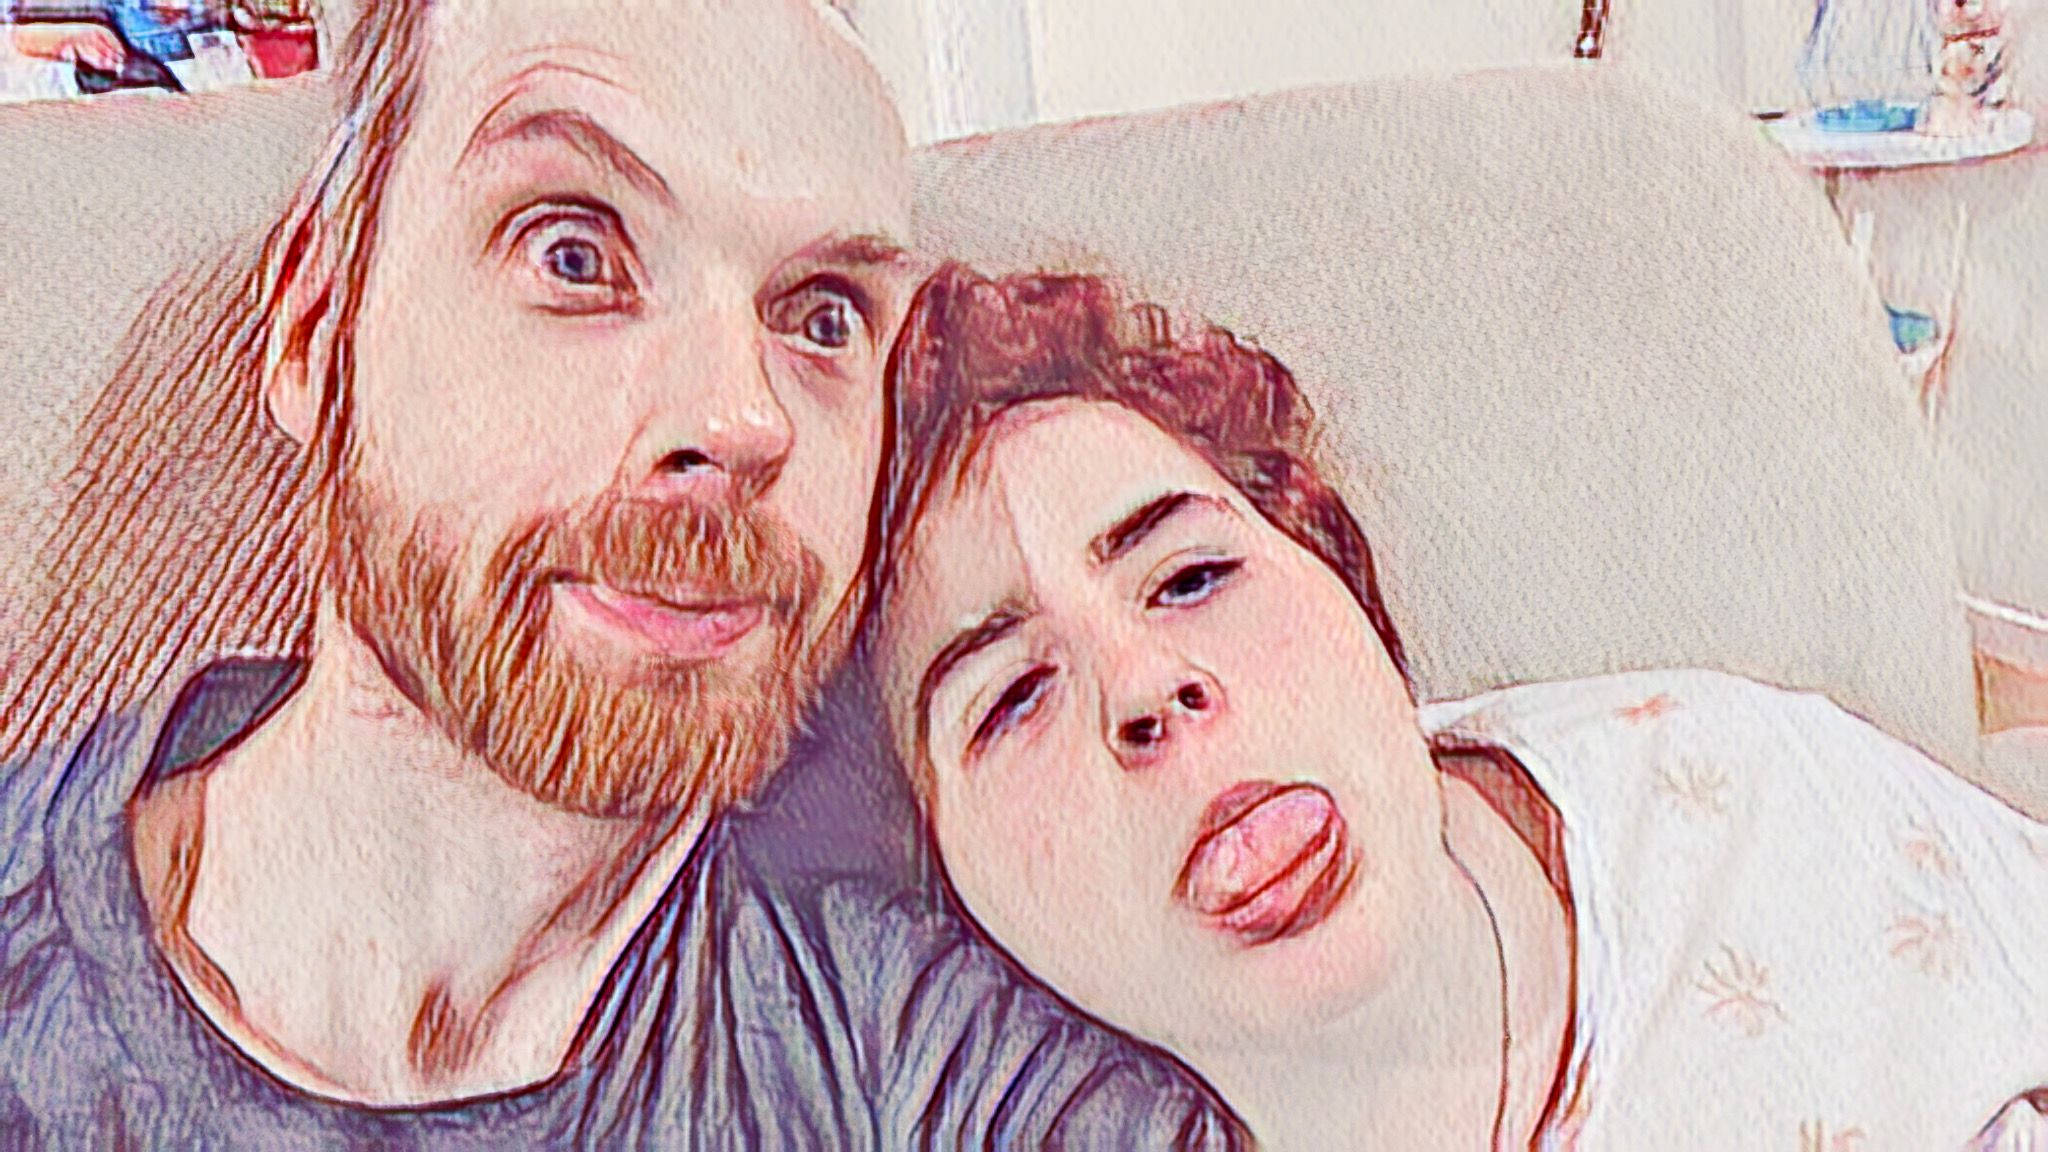 Yet another photo of Lily and me, Lily has her tongue out and I've got one eyebrow raised. It's drawn in a light airy style, looking like it's been done with pencils.